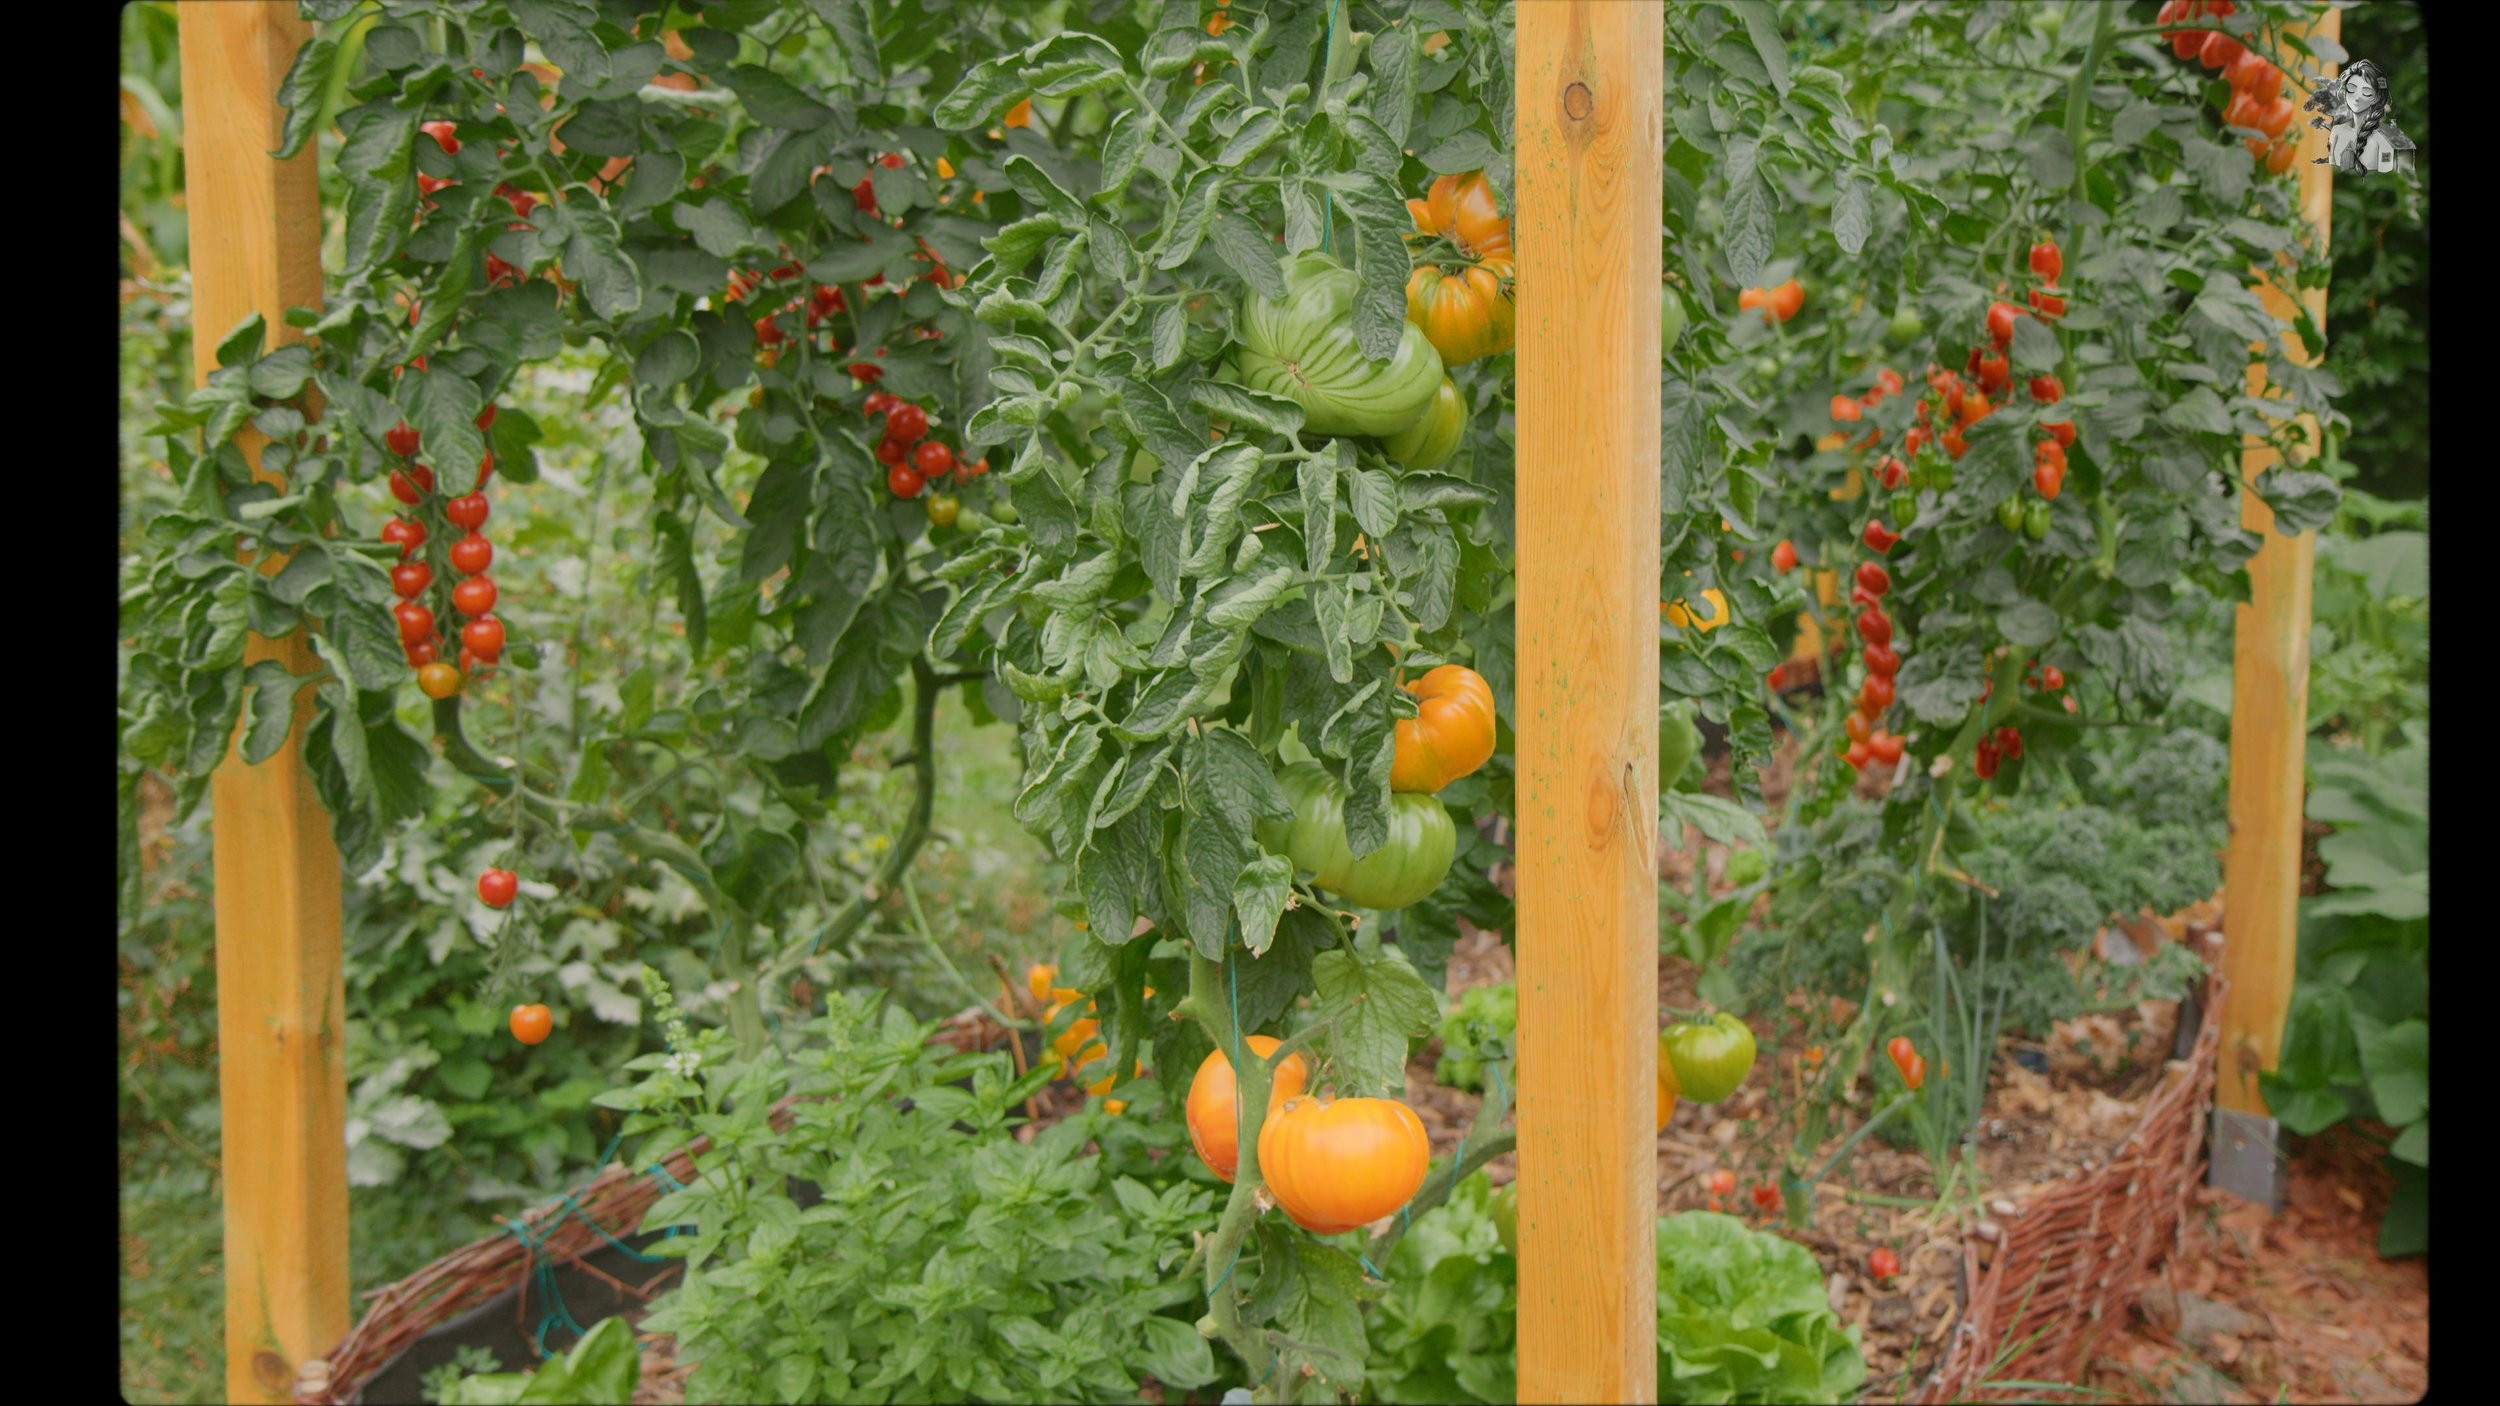 Everything About Growing Tomatoes - Her86m2 _1.250.1.jpg